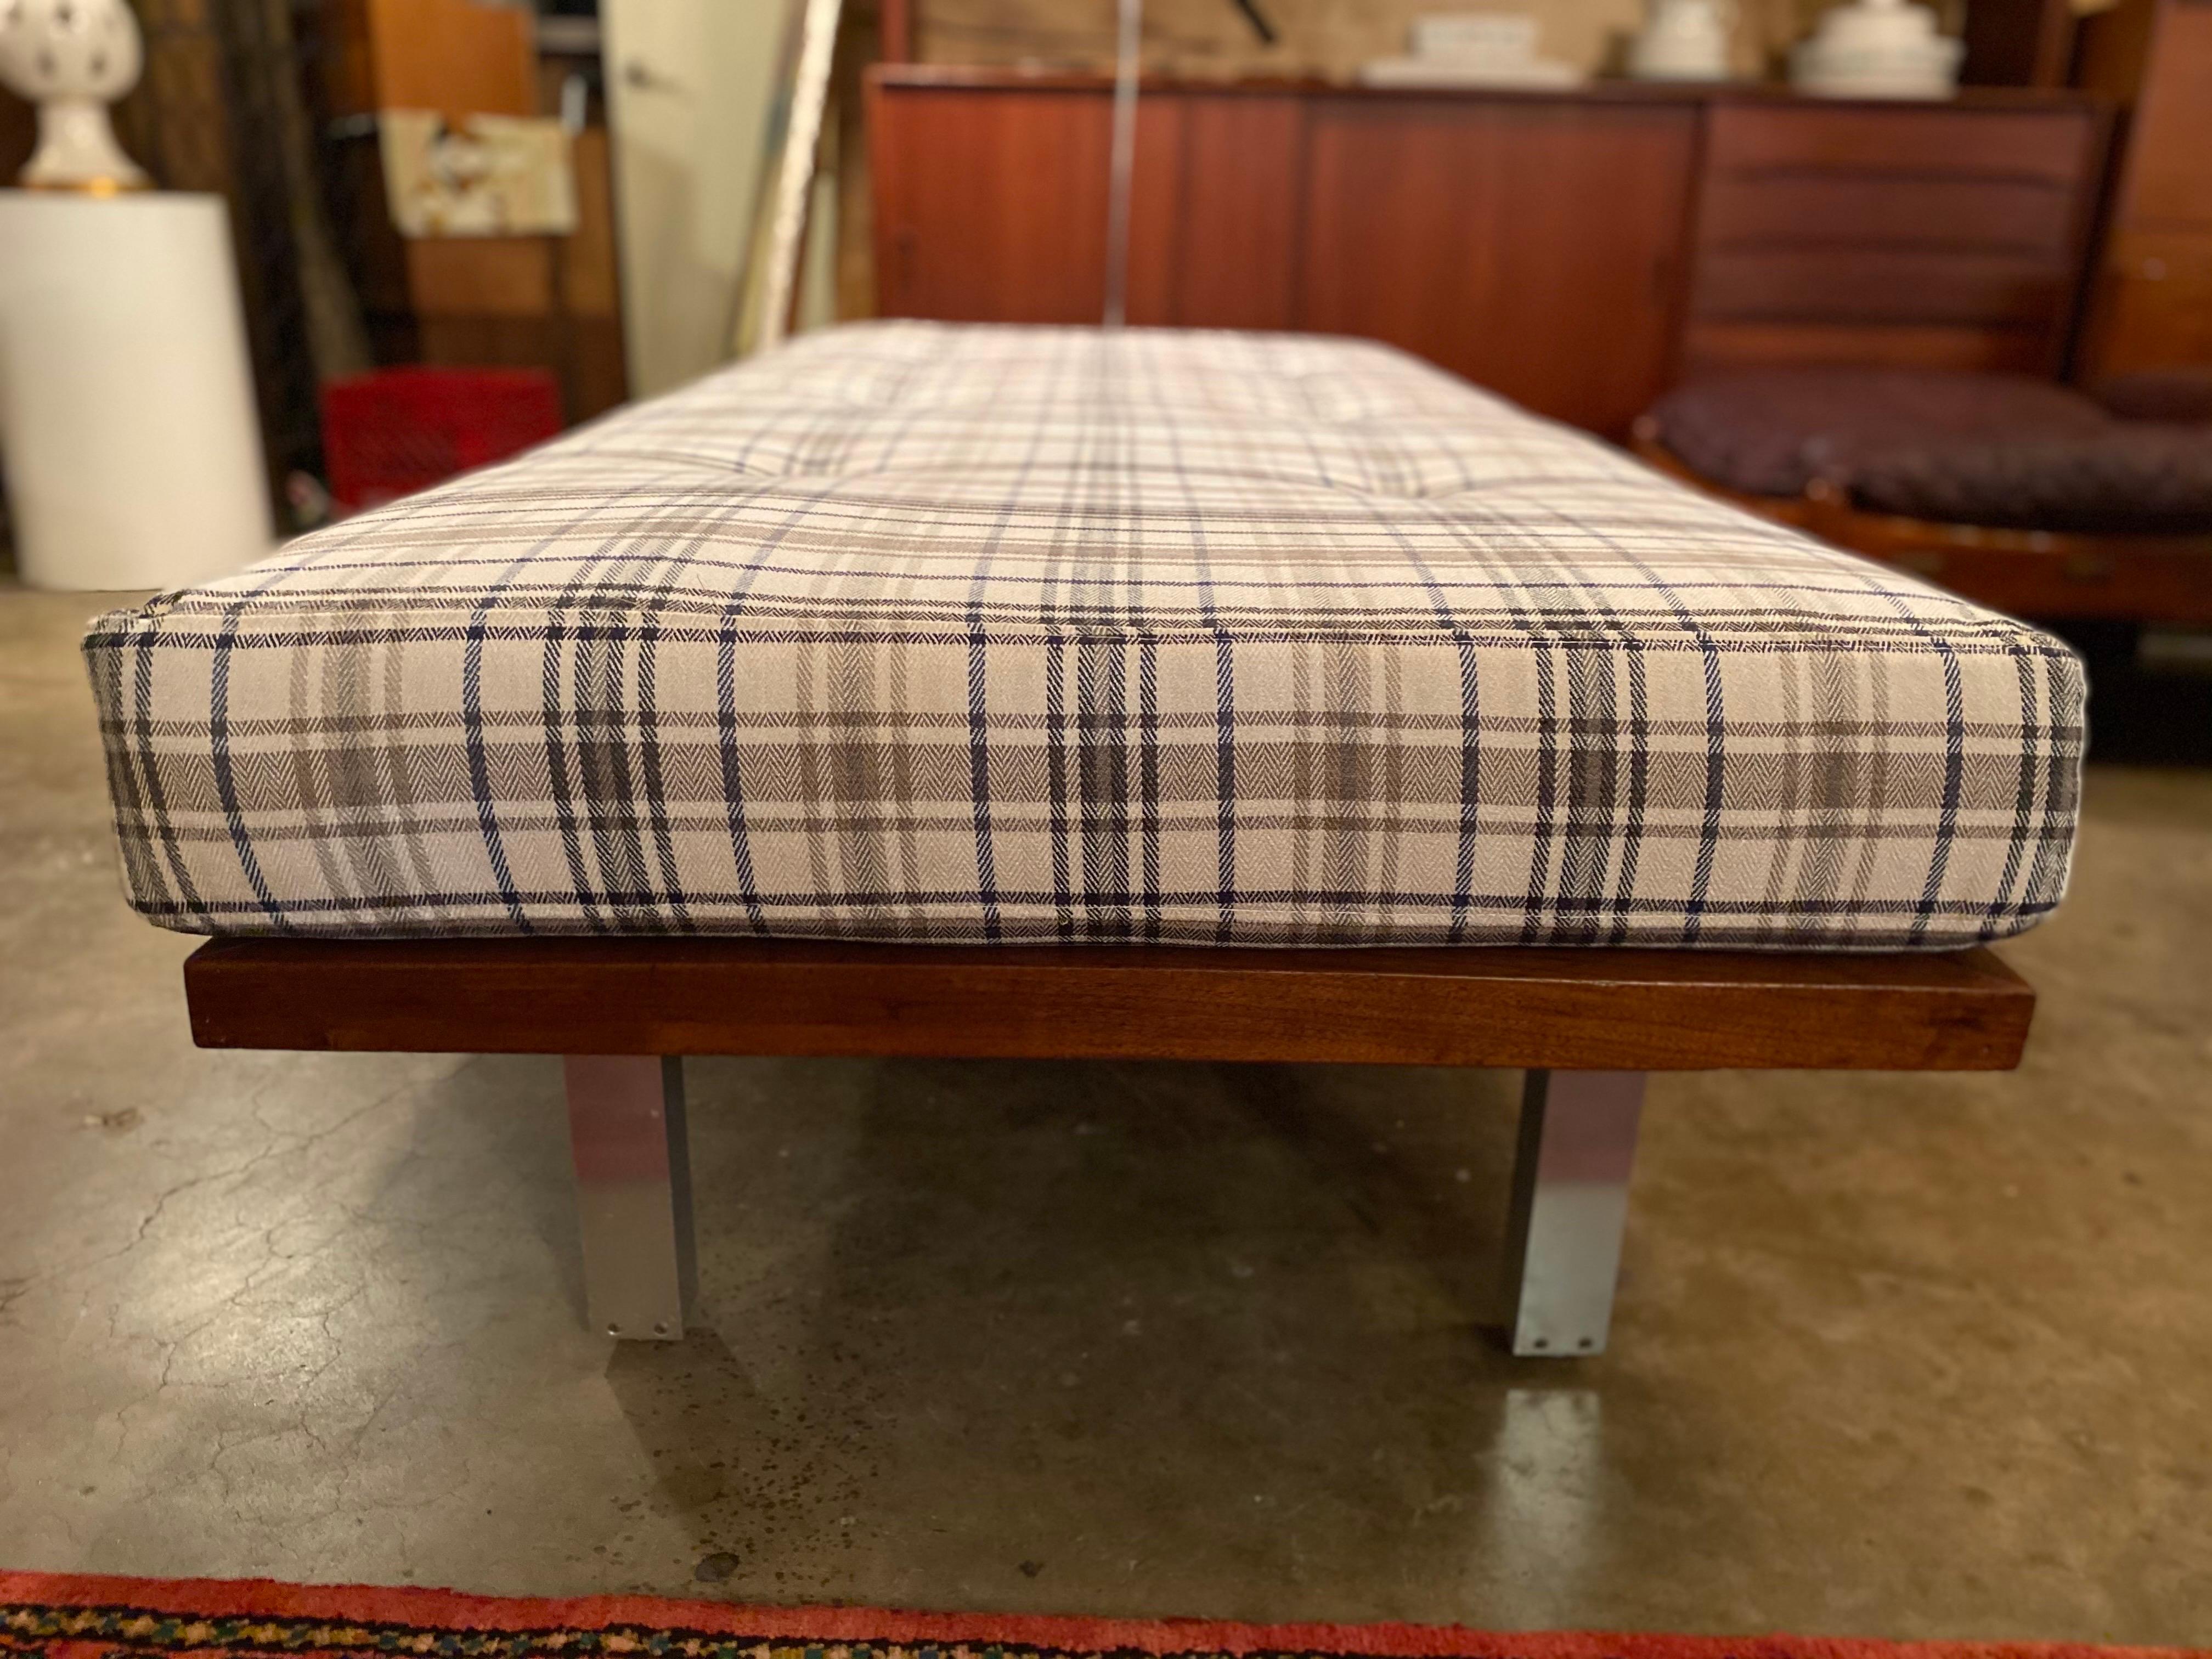 Mid-Century Modern daybed has been newly reupholstered with a neutral plaid fabric. The platform base has been newly strapped and is made of walnut with aluminum feet. This modern daybed is a great addition to any space and is great for lounging.